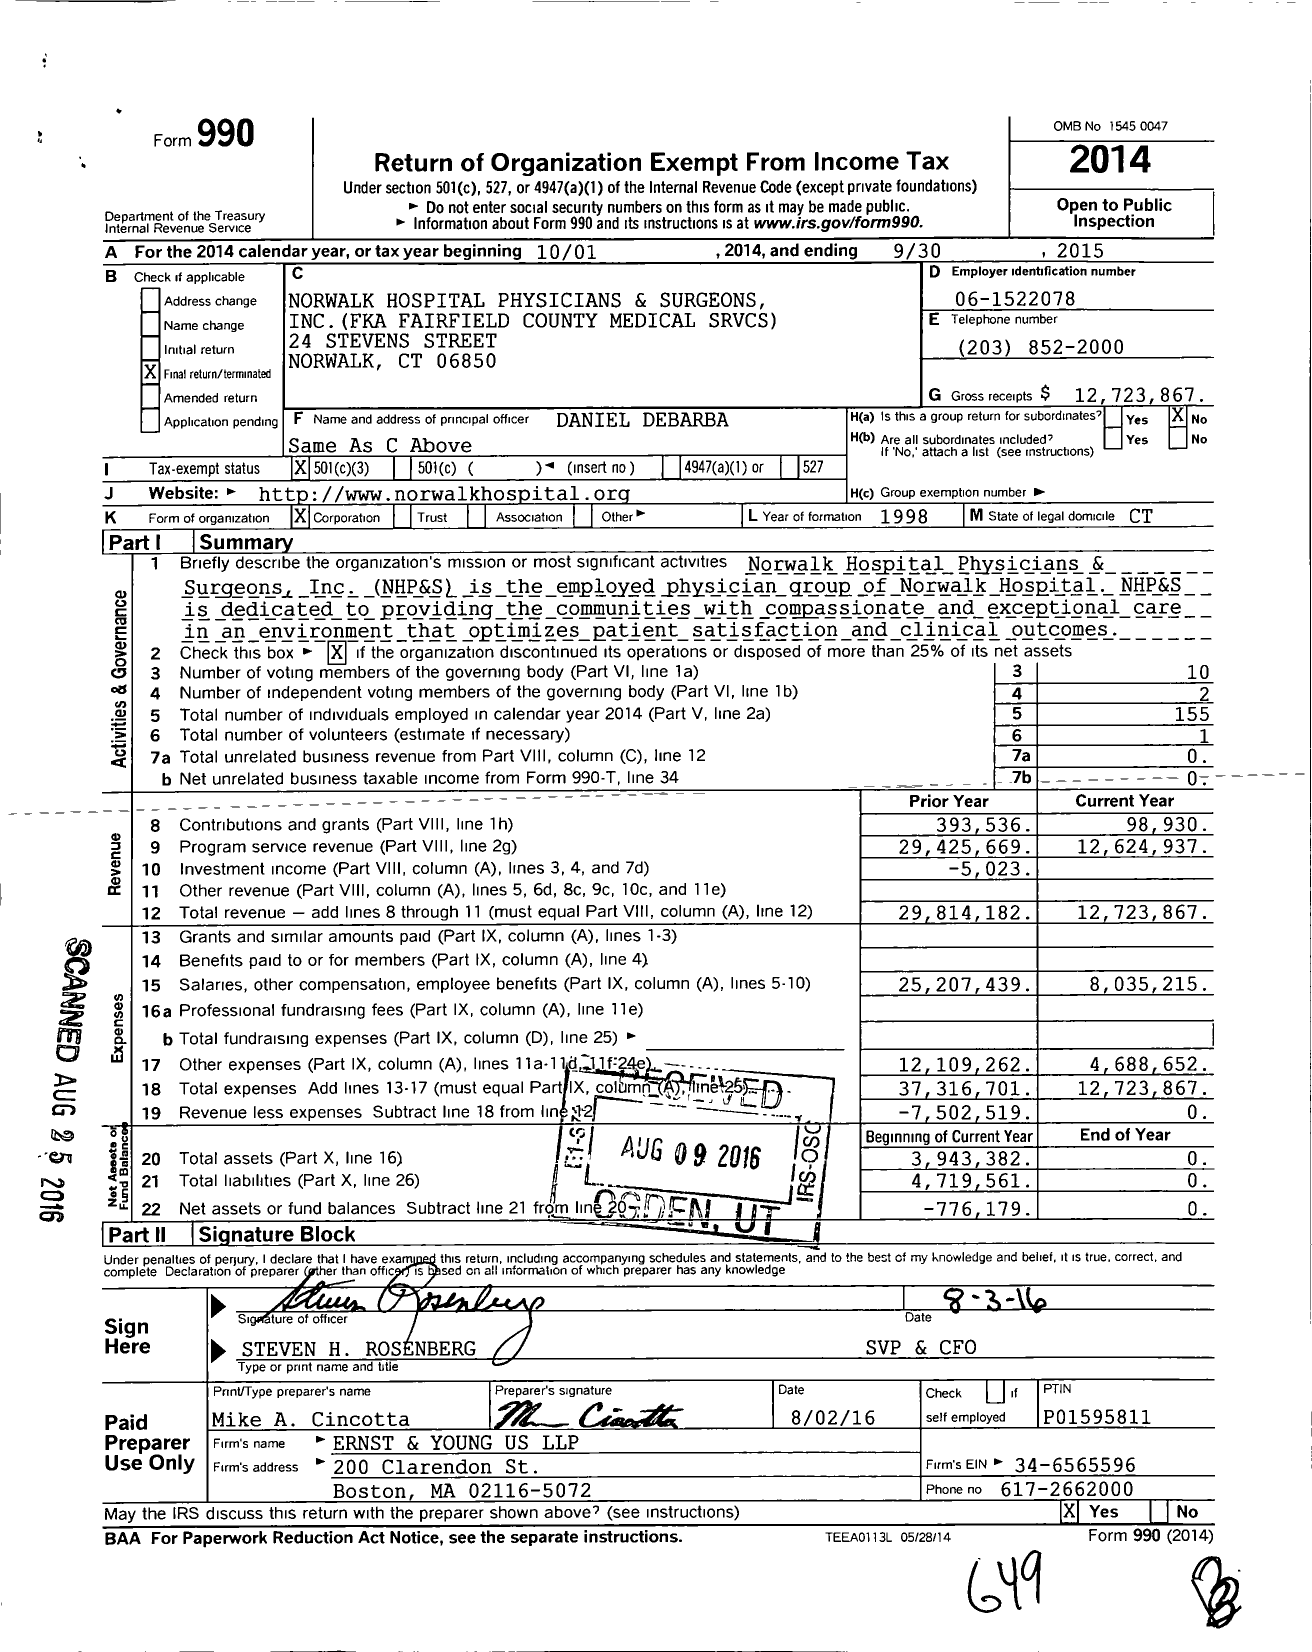 Image of first page of 2014 Form 990 for Norwalk Hospital Physicians and Surgeons